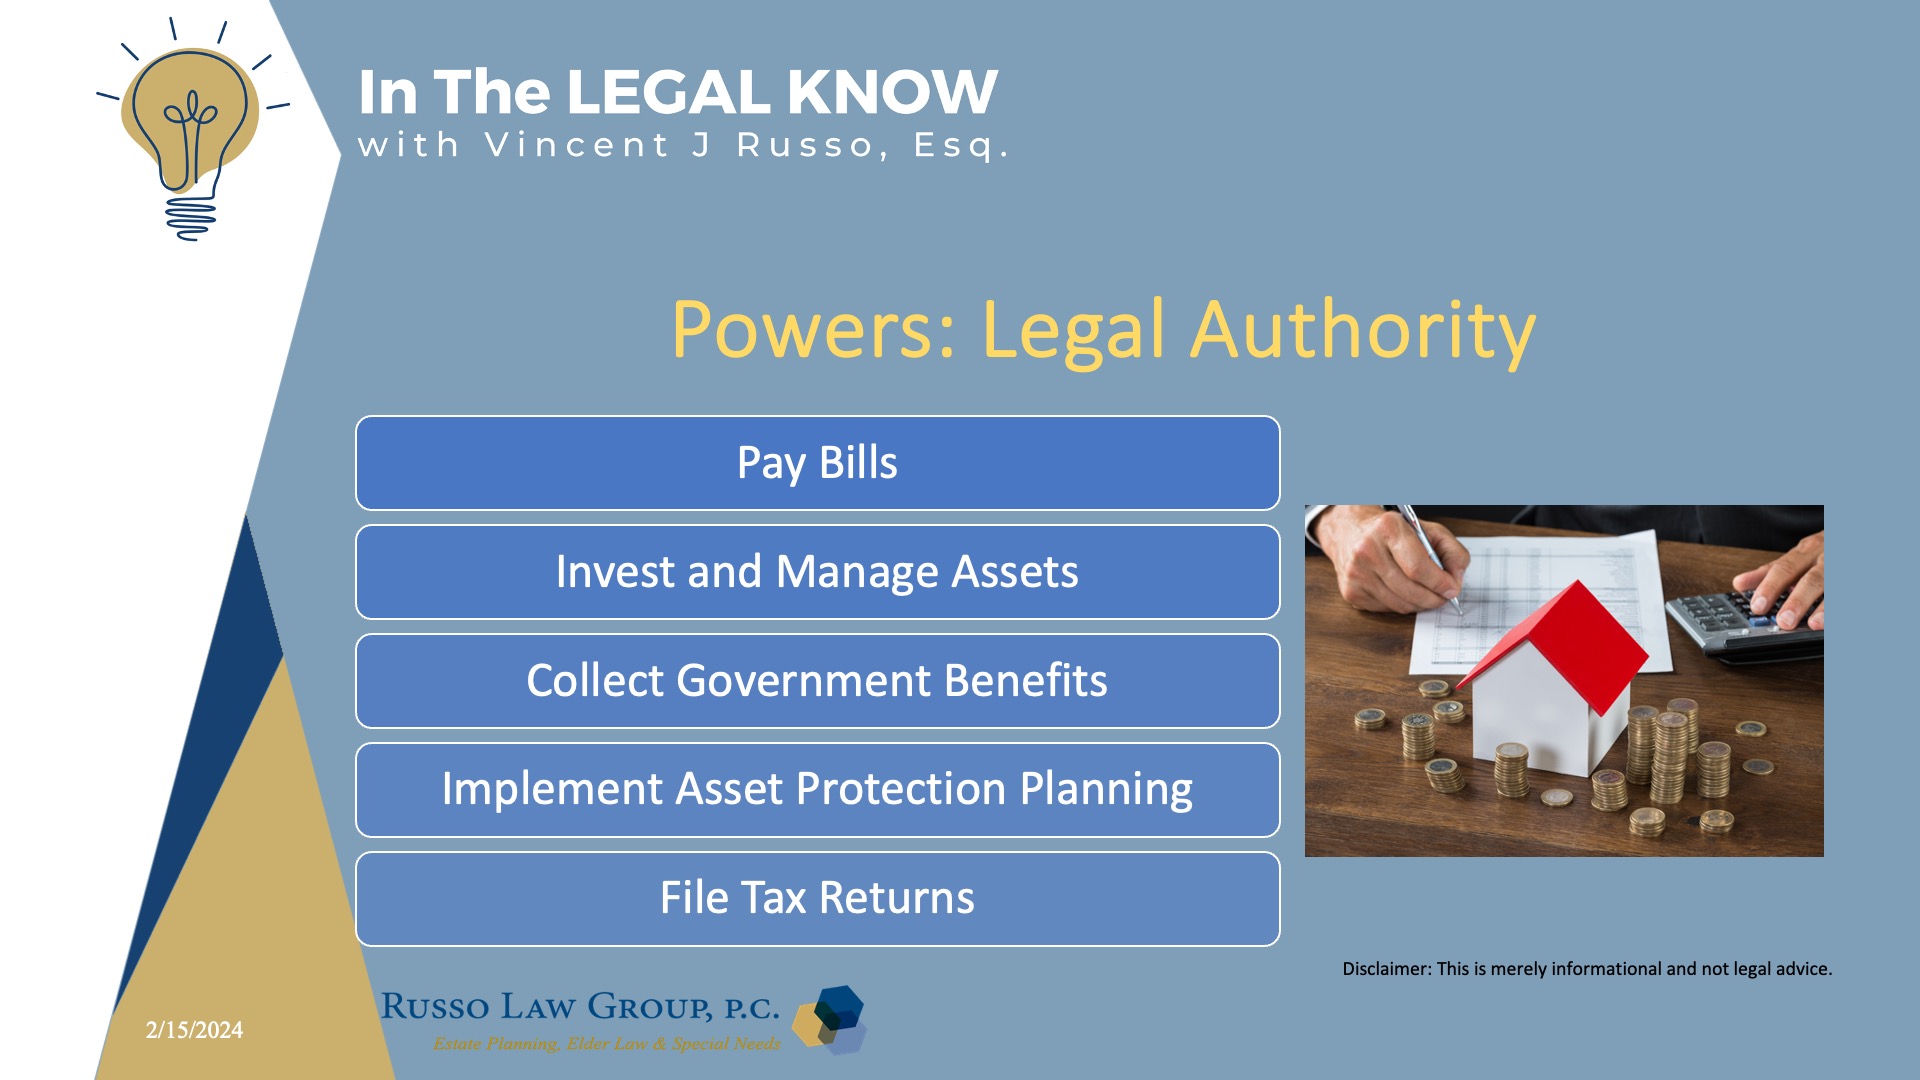 Powers: Legal Authority